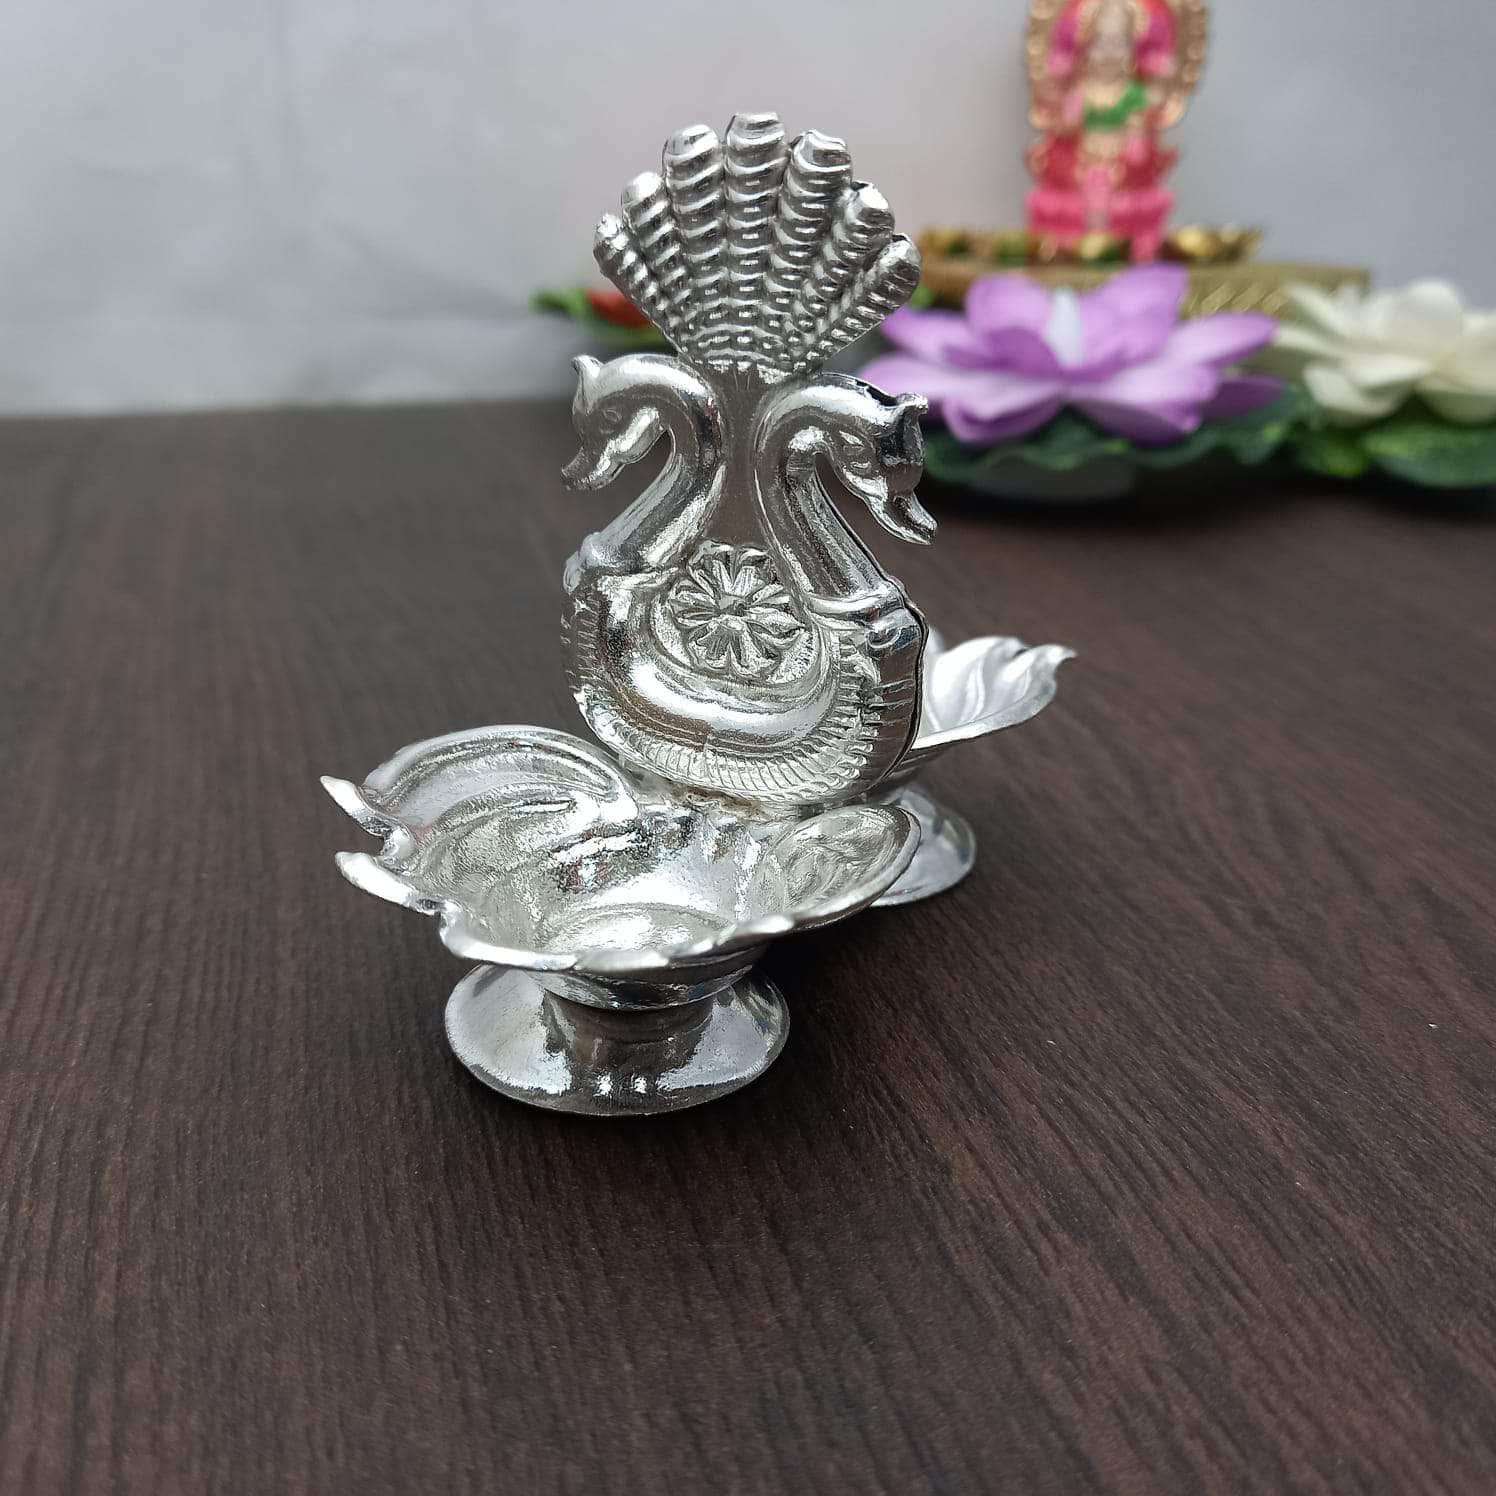 German Silver Kamatchi Diya - 4.2 inch - WL3519 - WL3519 at Rs 424.15 |  Gifts for all occasions by Wedtree